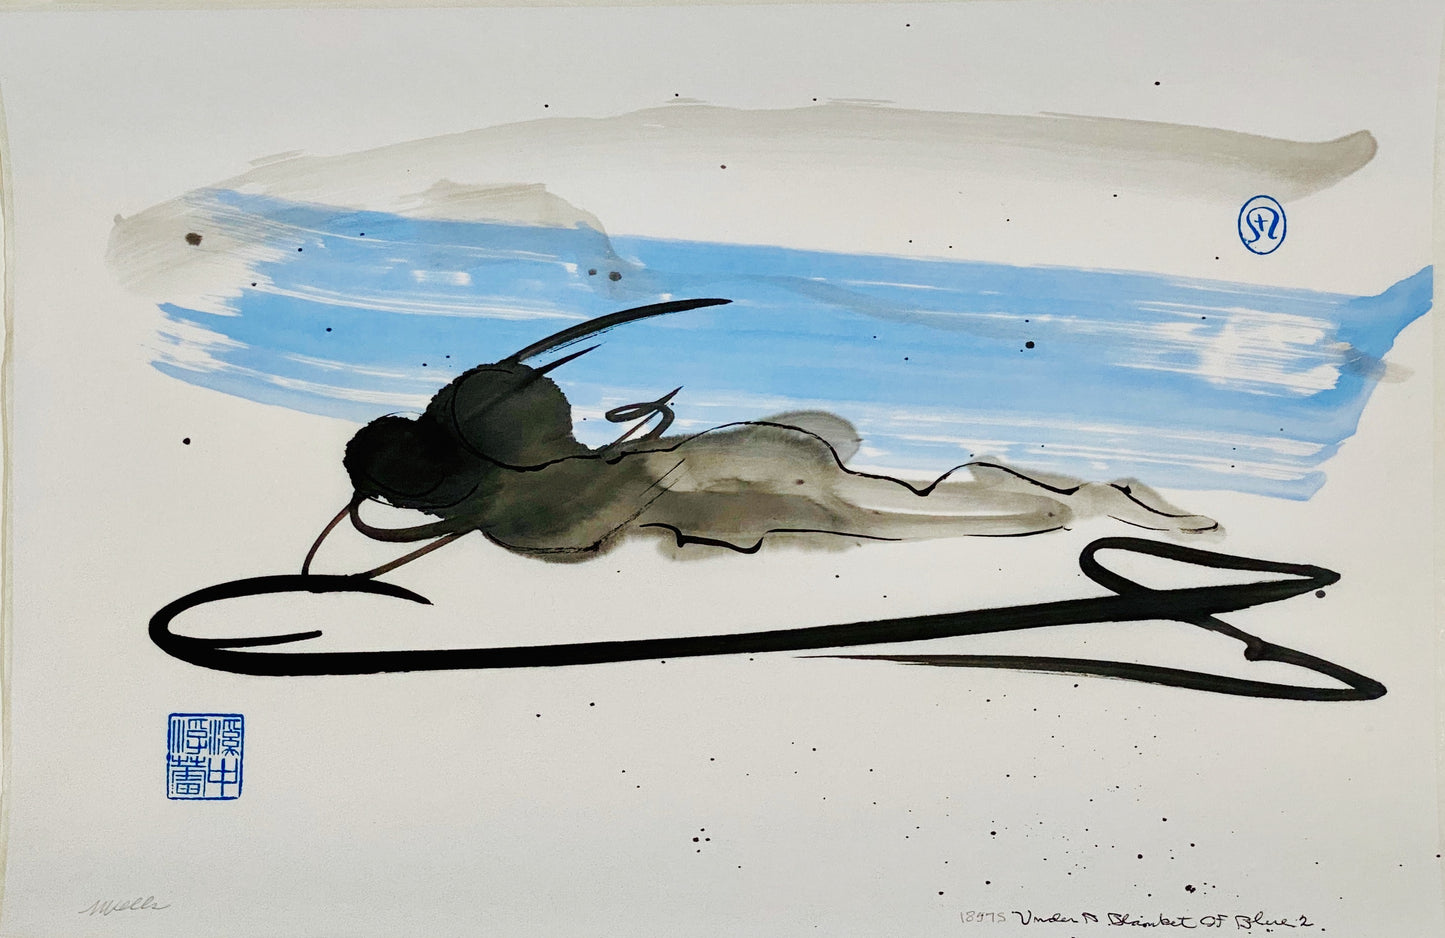 Abstract sumi e  Original “Under A Blanket of Blue” by Marilyn Wells